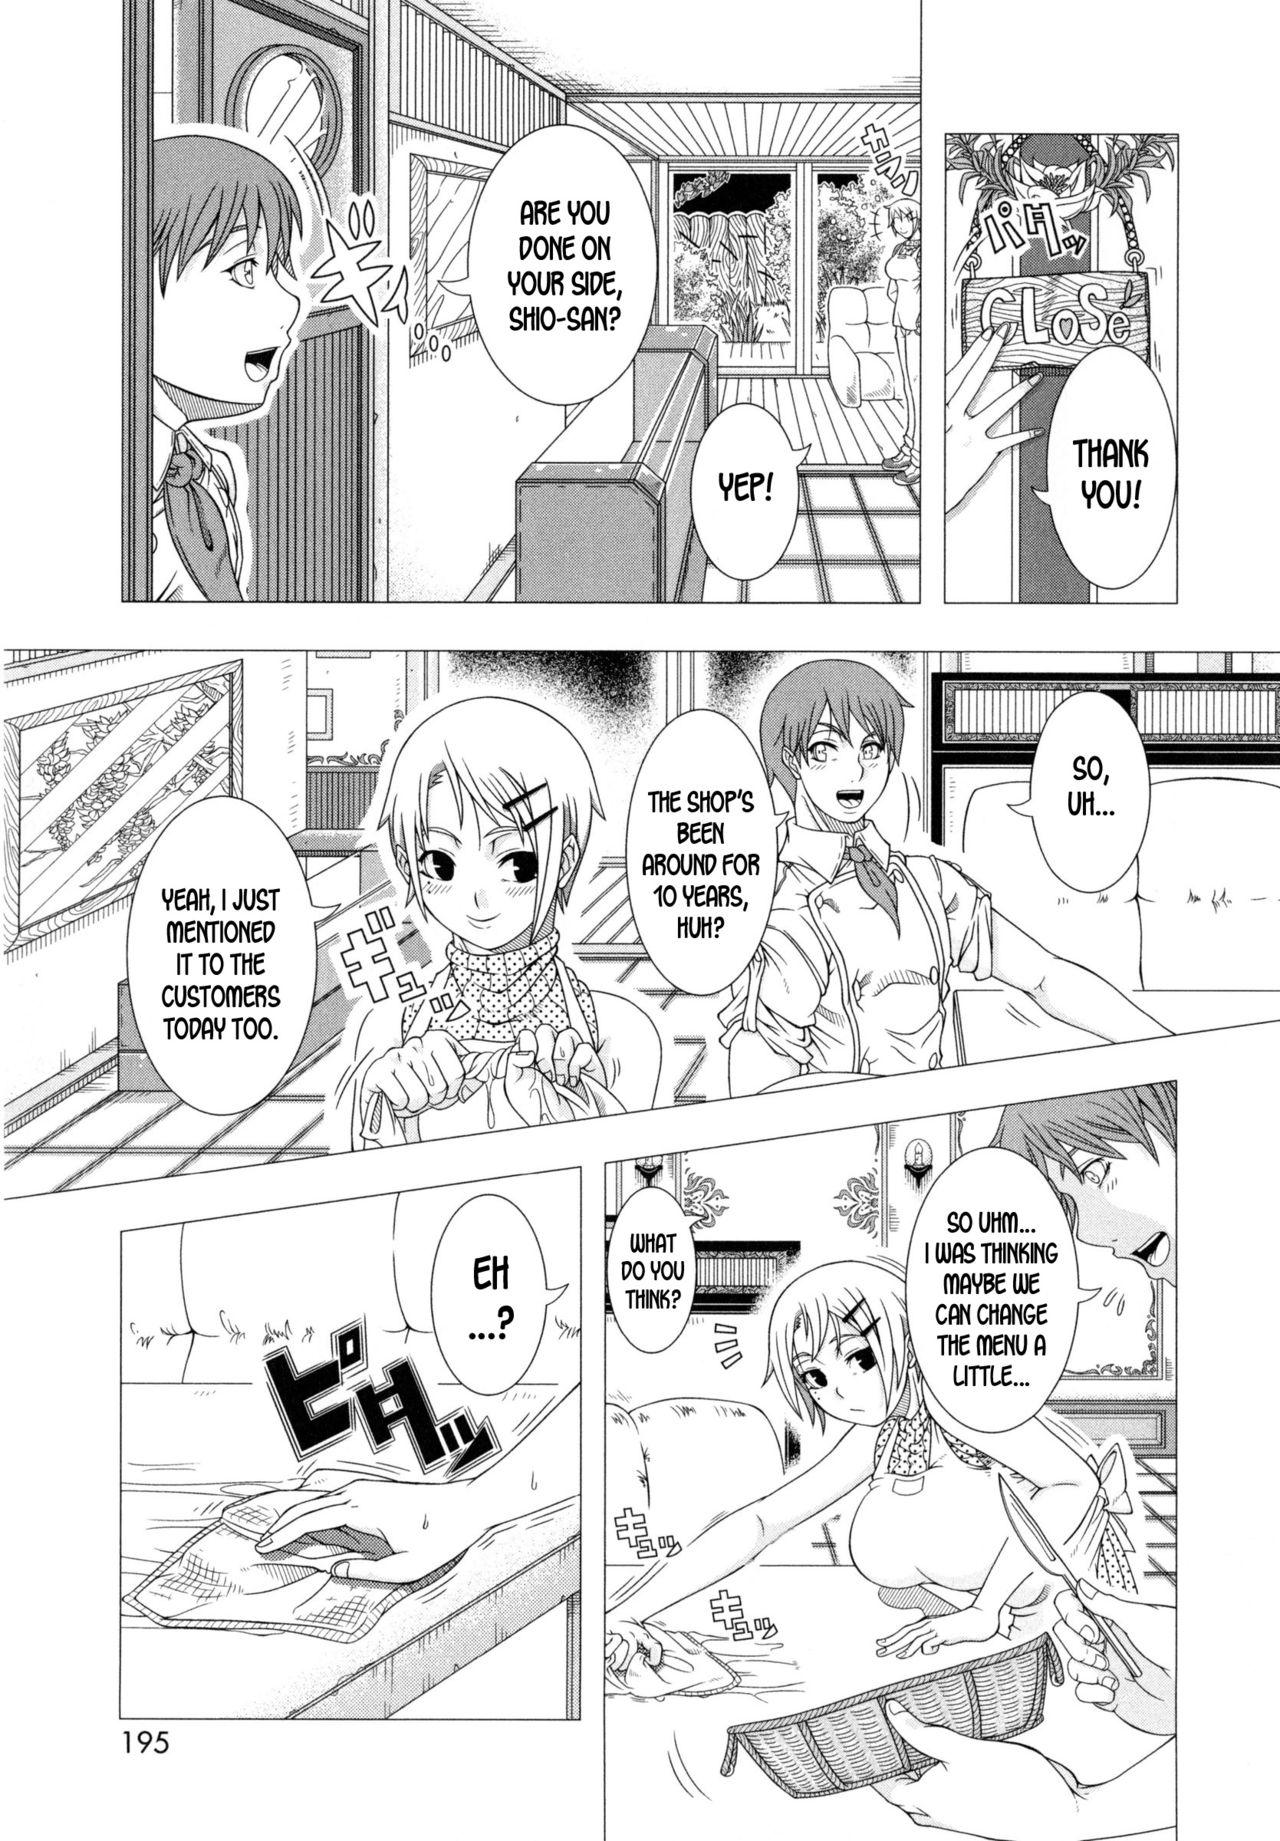 Mas Futari no Jikan | Our Time Together Yanks Featured - Page 5